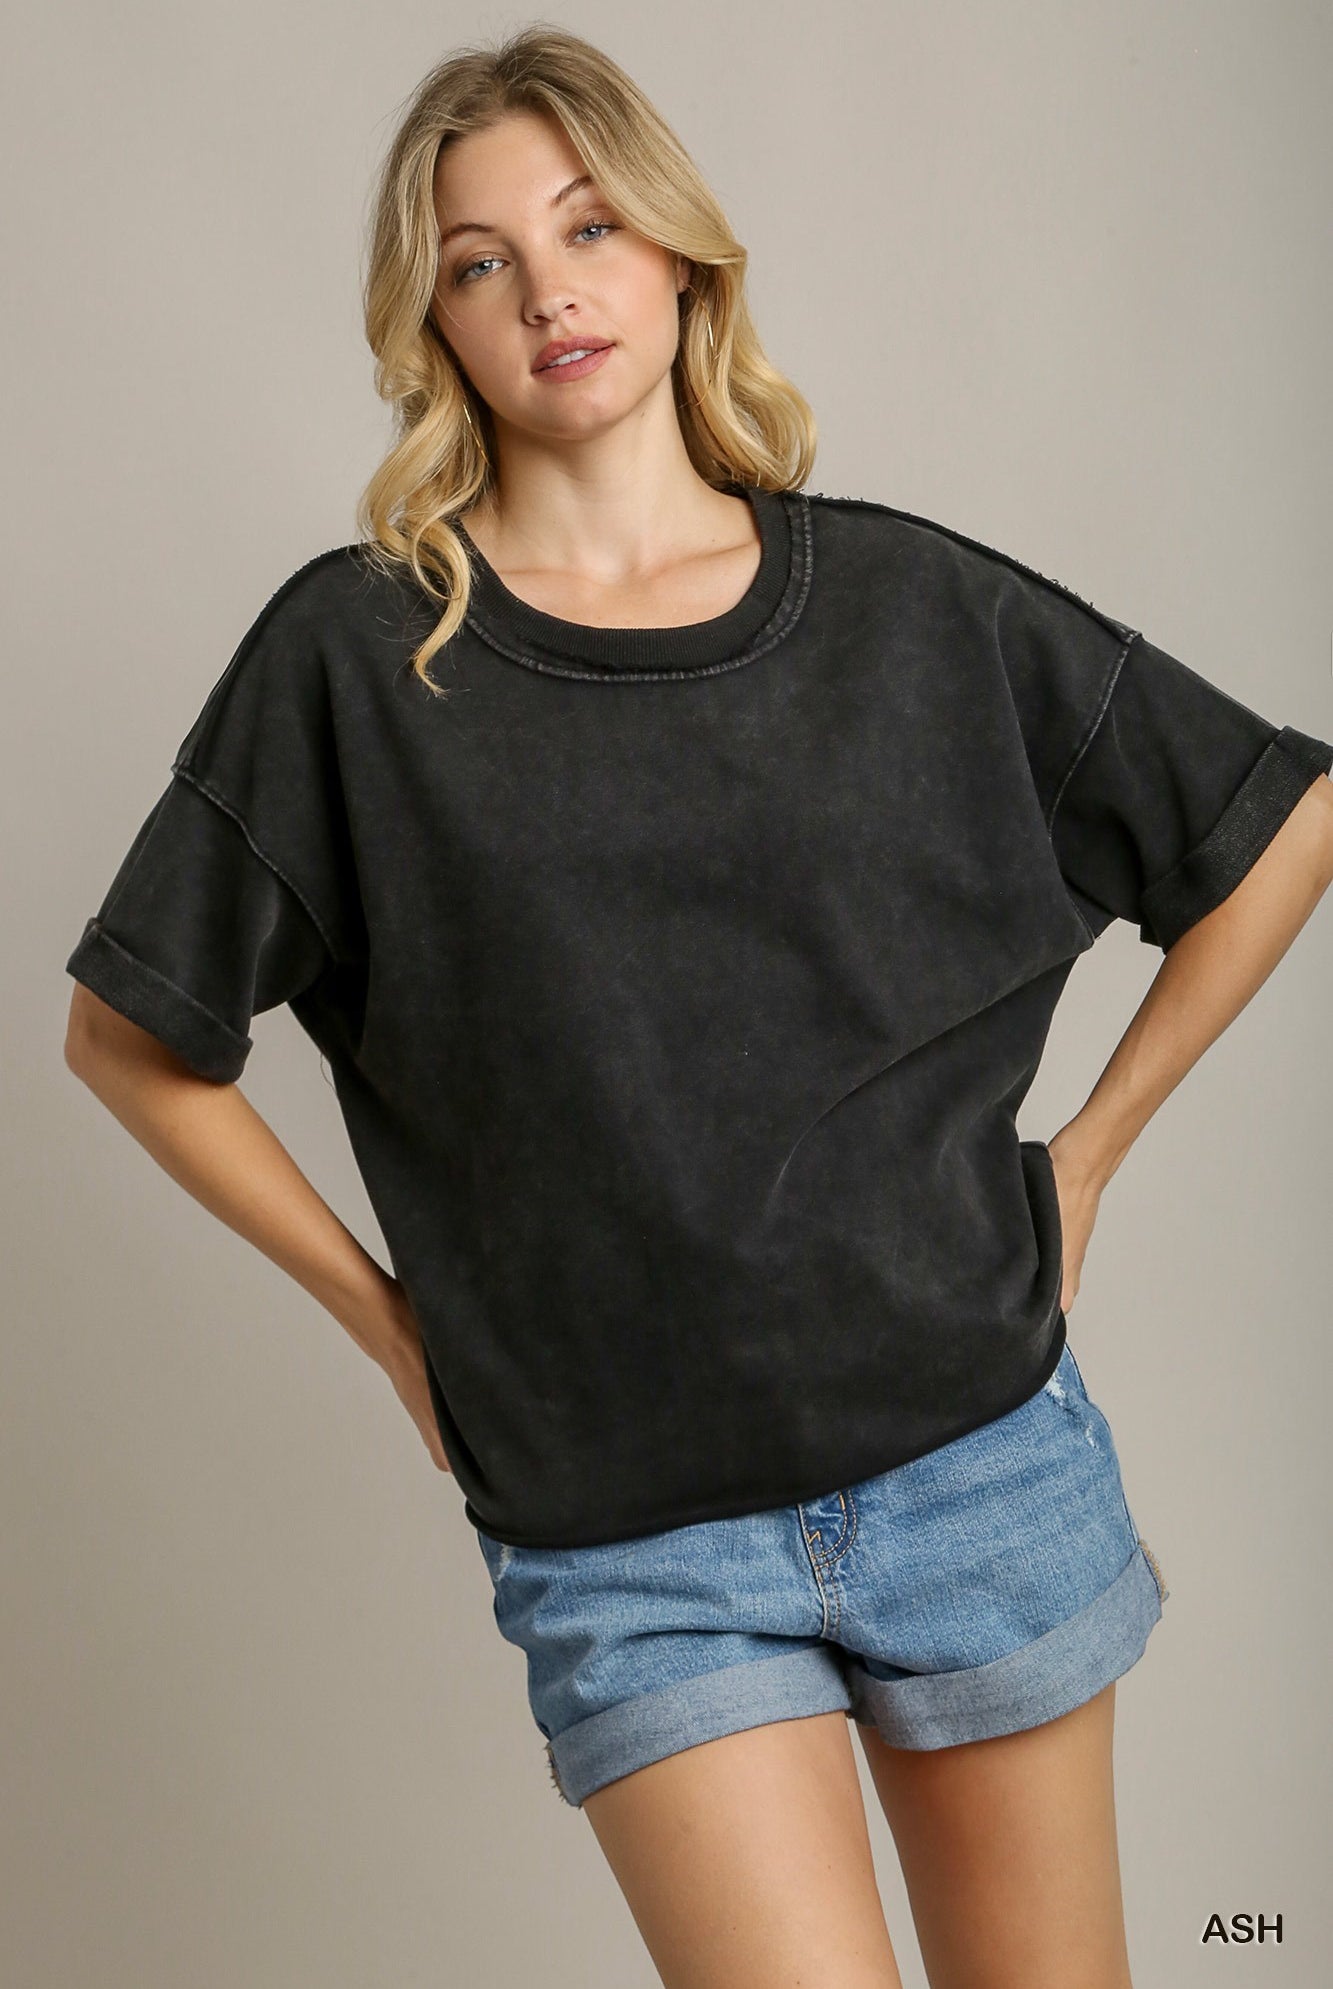 Boxy Cut Washed French Terry Top With Cut Edge Details & Short Folded Sleeves| Stuffology Boutique-Short Sleeves-Stuffology - Where Vintage Meets Modern-Stuffology - Where Vintage Meets Modern, A Boutique for Real Women in Crosbyton, TX